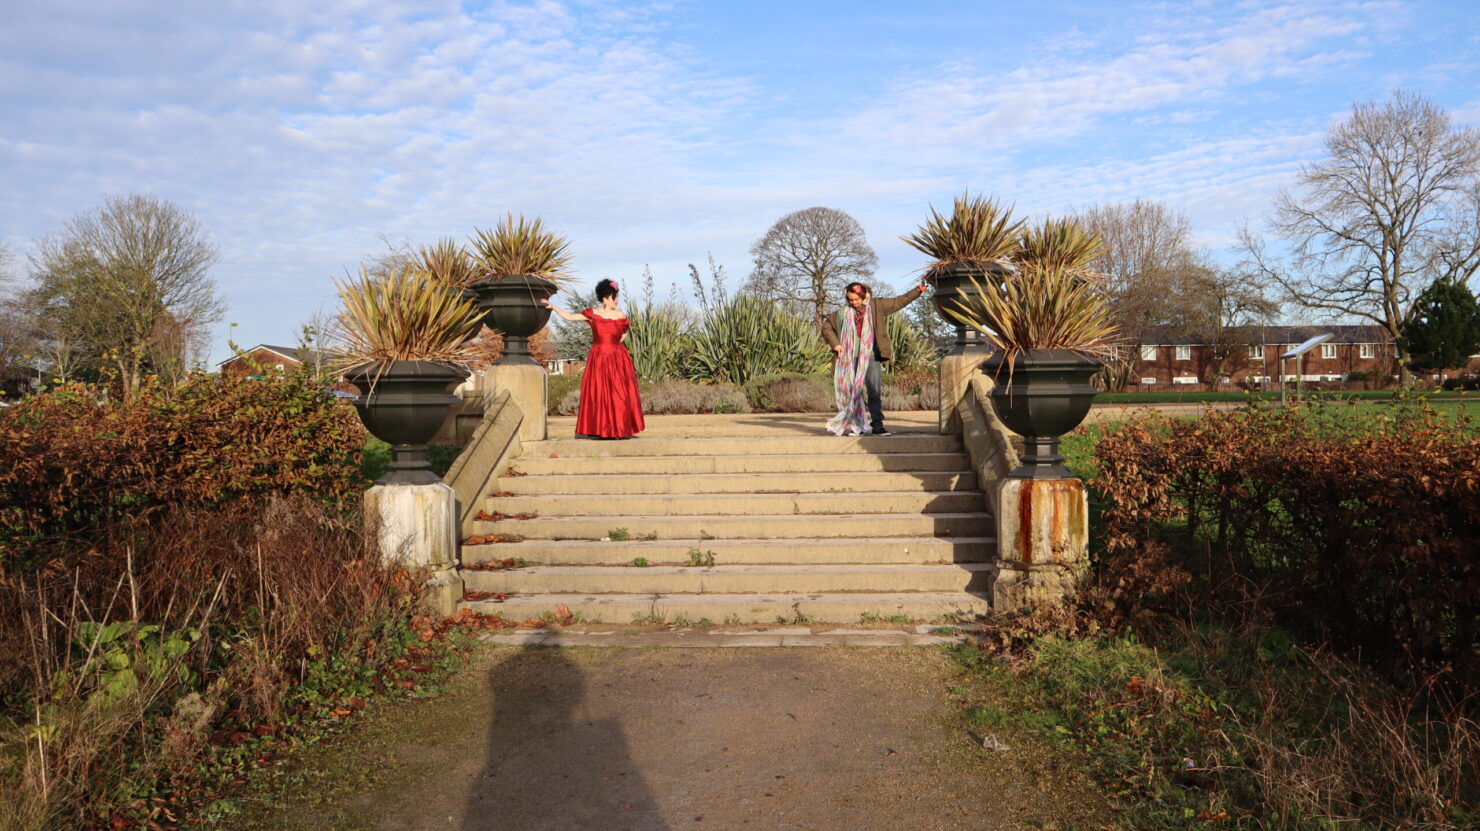 Joe Mills and Ruby Tingle pose at the top of a flight of stairs in a big garden